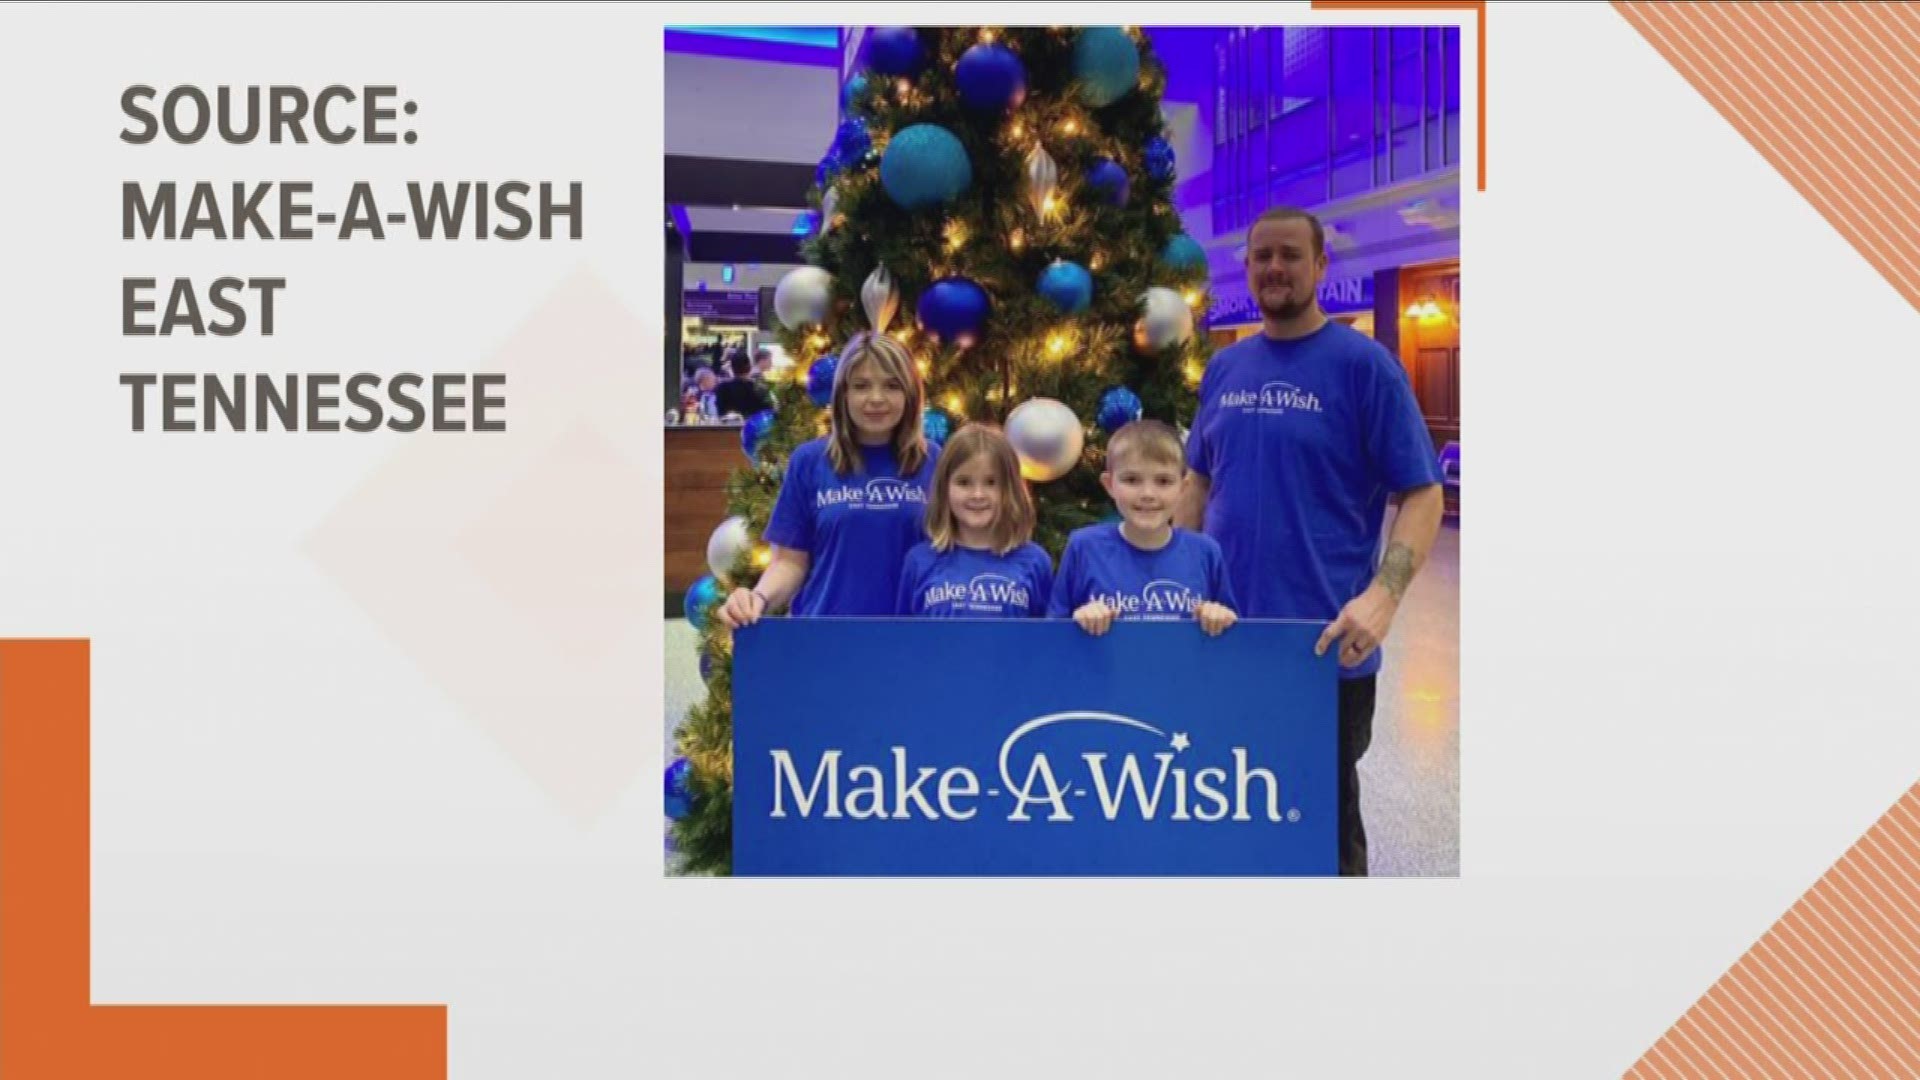 An East Tennessee child wanted to go Disney, and the Make-A-Wish Foundation granted his wish.